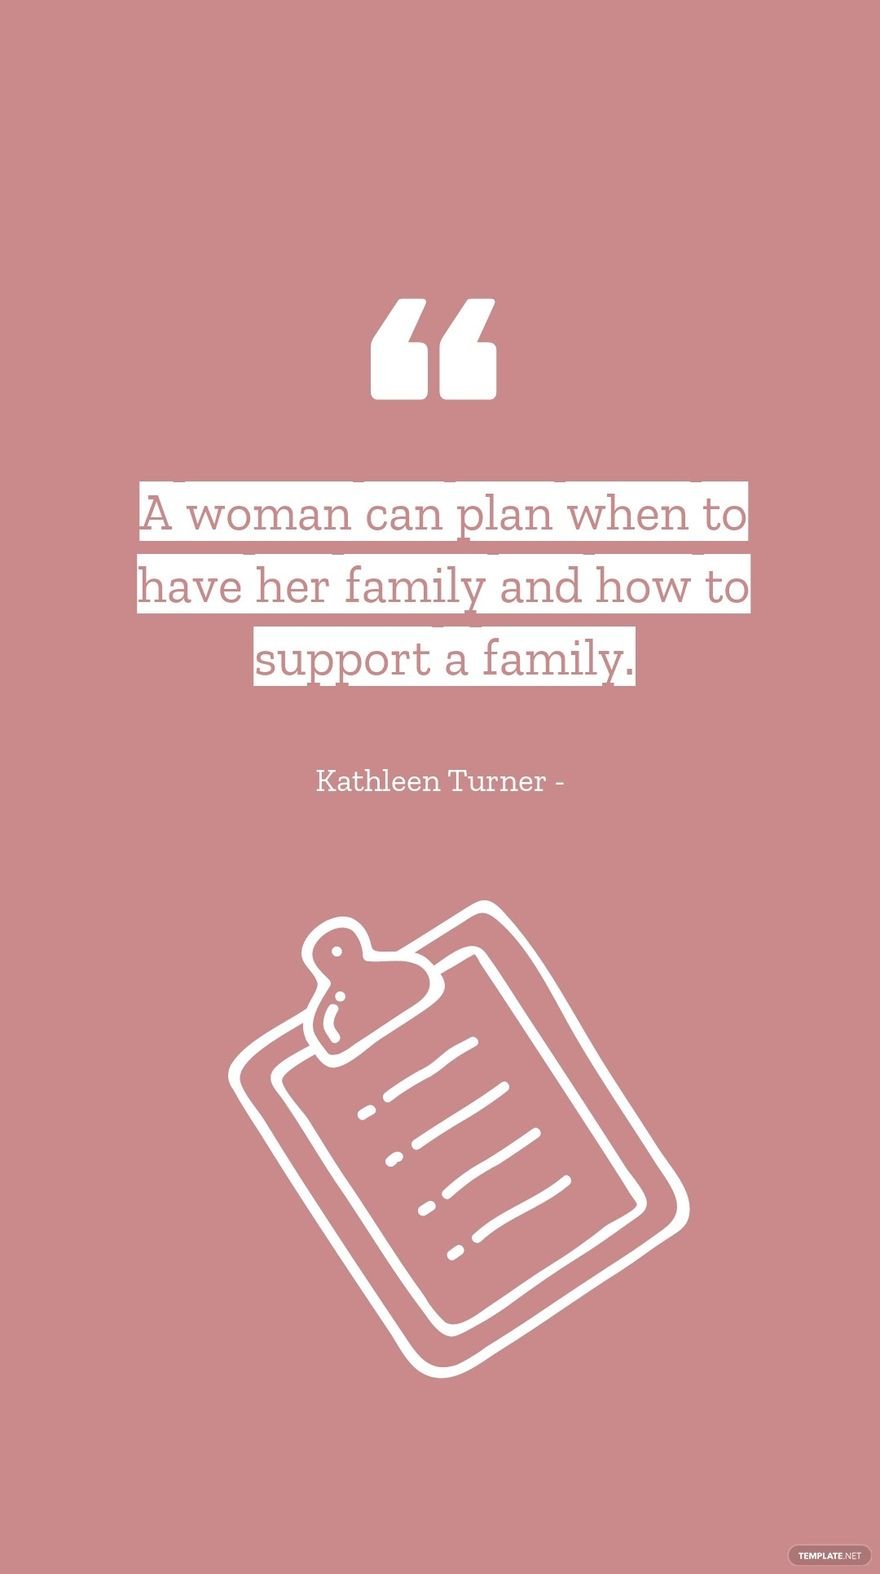 Kathleen Turner - A woman can plan when to have her family and how to support a family.